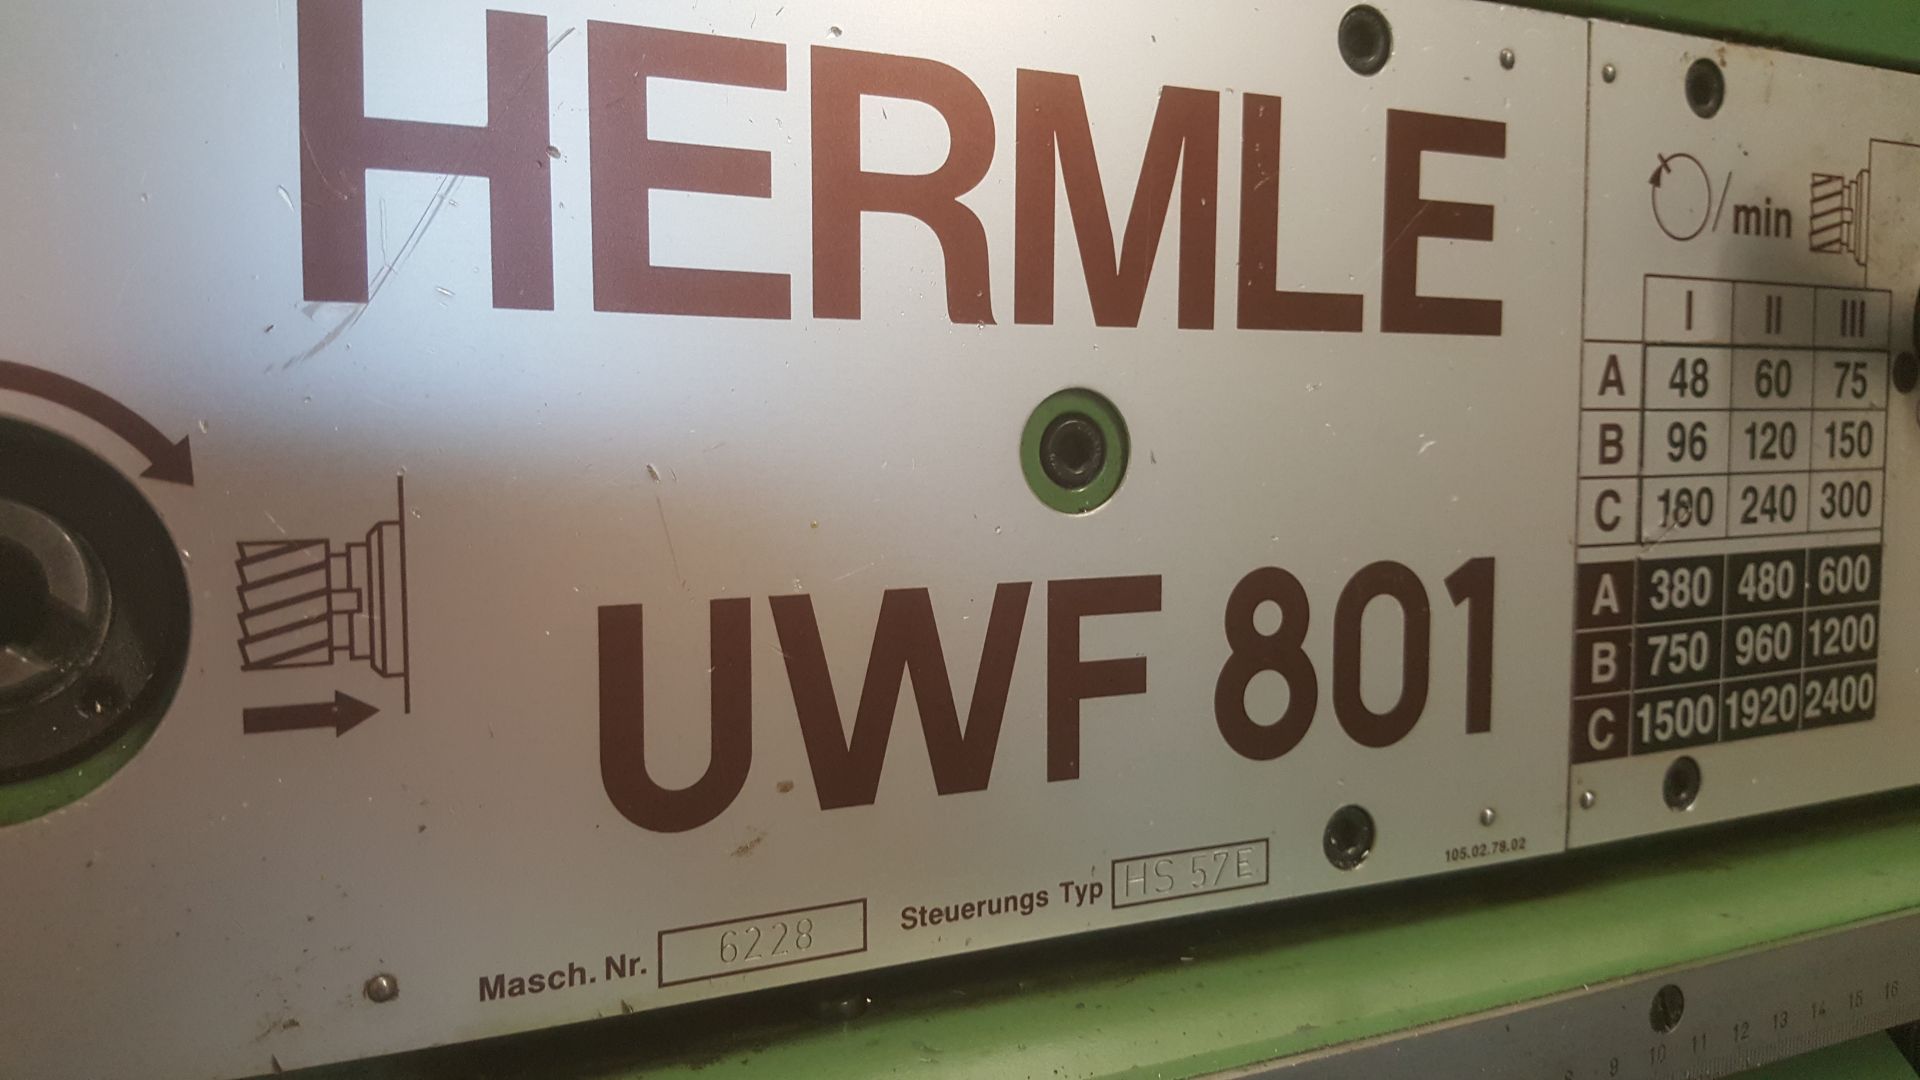 HERMLE UWF-801 universal milling machine, Heidenhain 3 Axis programmable DRO, 48 - 2,400 RPM spindle - Image 5 of 6